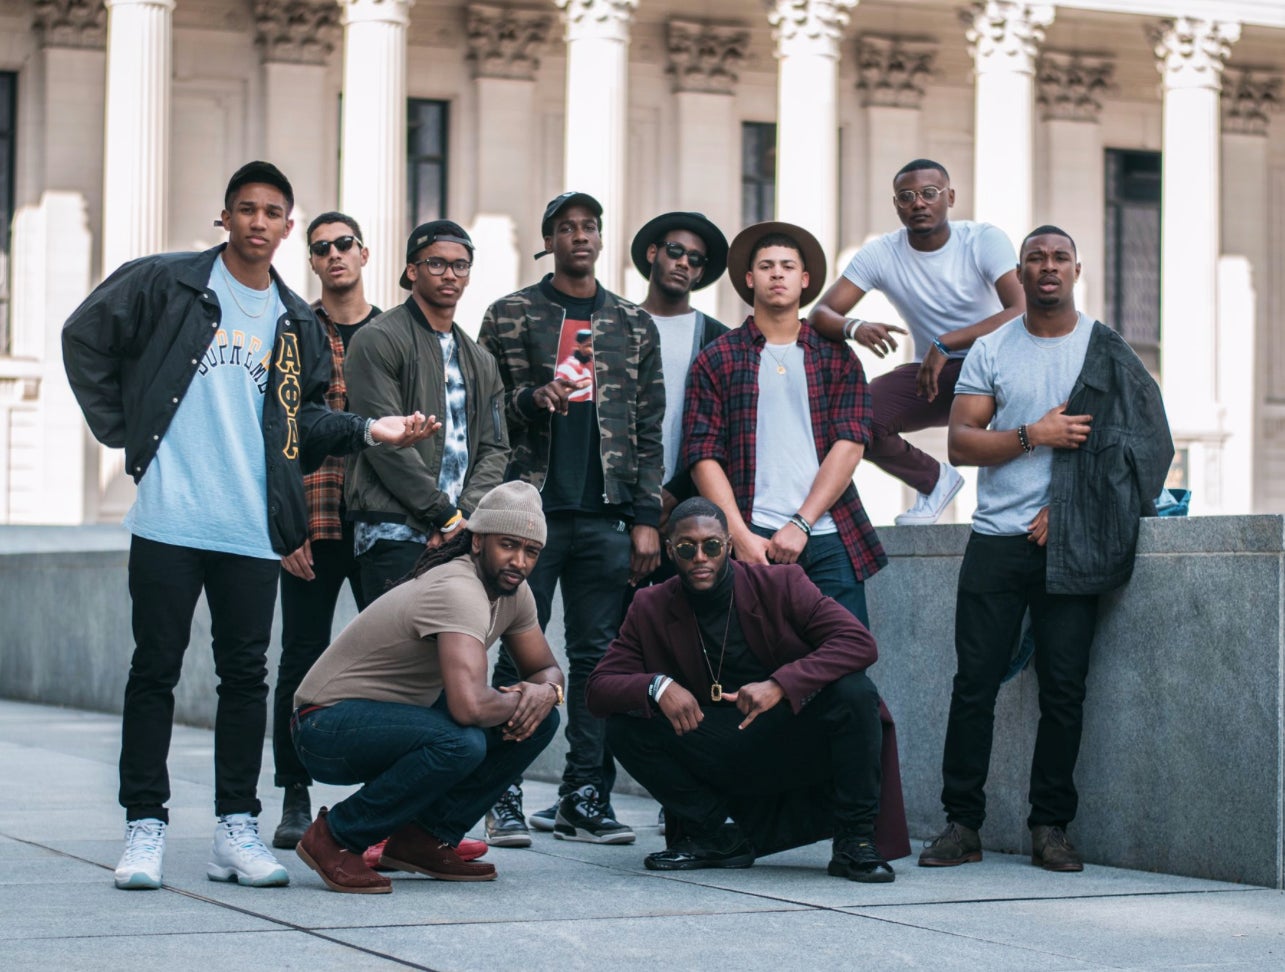 #BlackMenofYaleUniversity Photos Give A Fresh Perspective to the Ivy League Experience